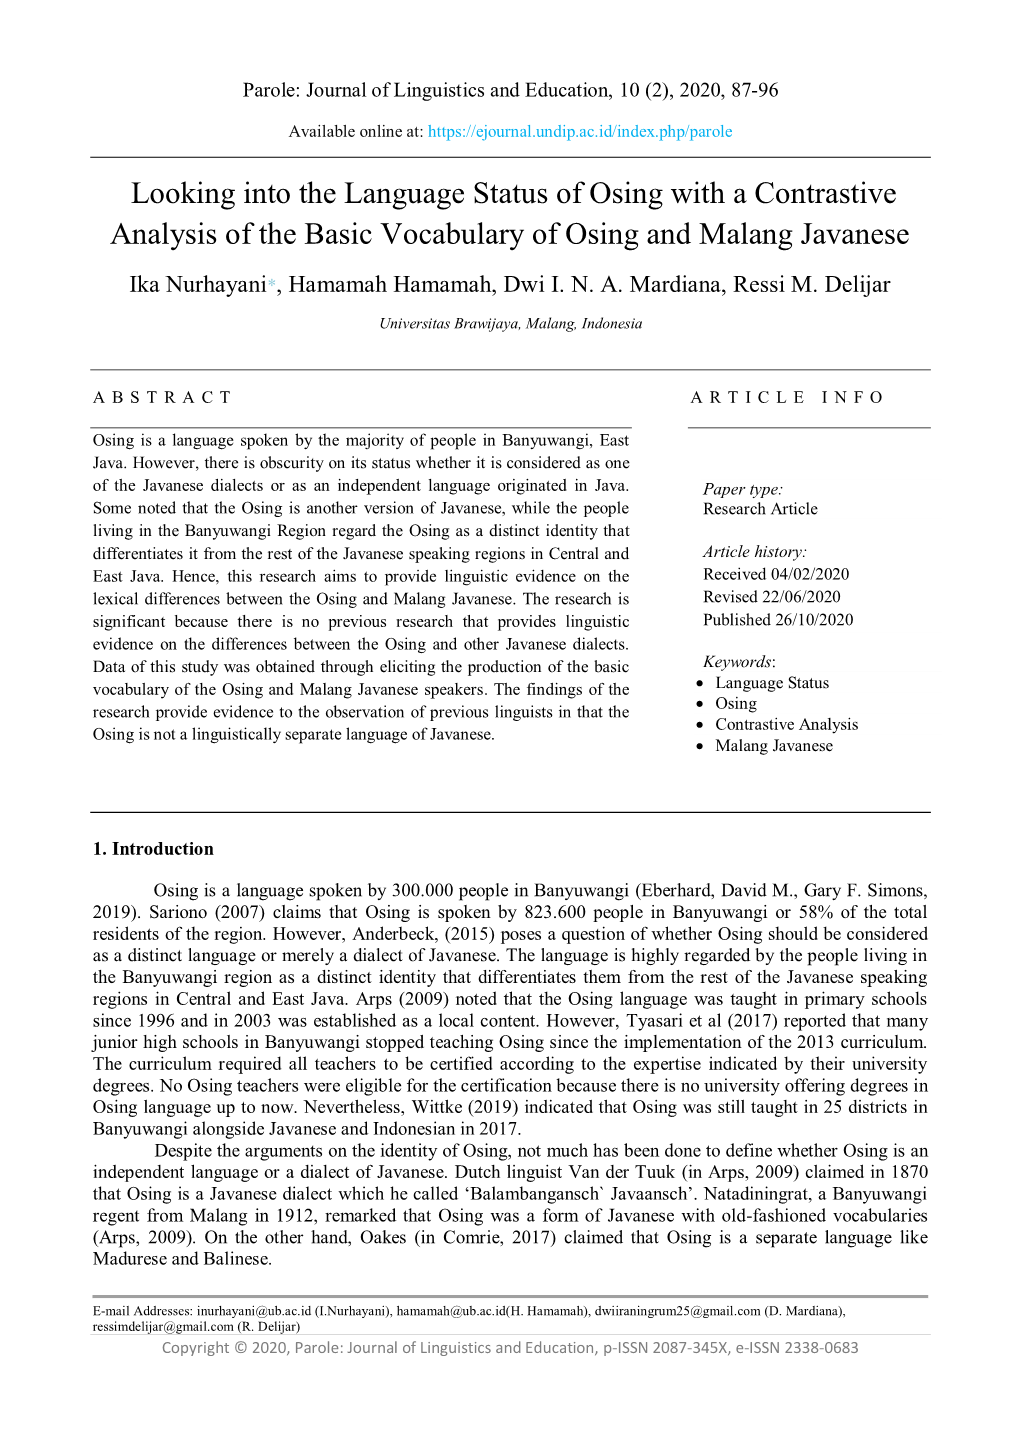 Looking Into the Language Status of Osing with a Contrastive Analysis of the Basic Vocabulary of Osing and Malang Javanese